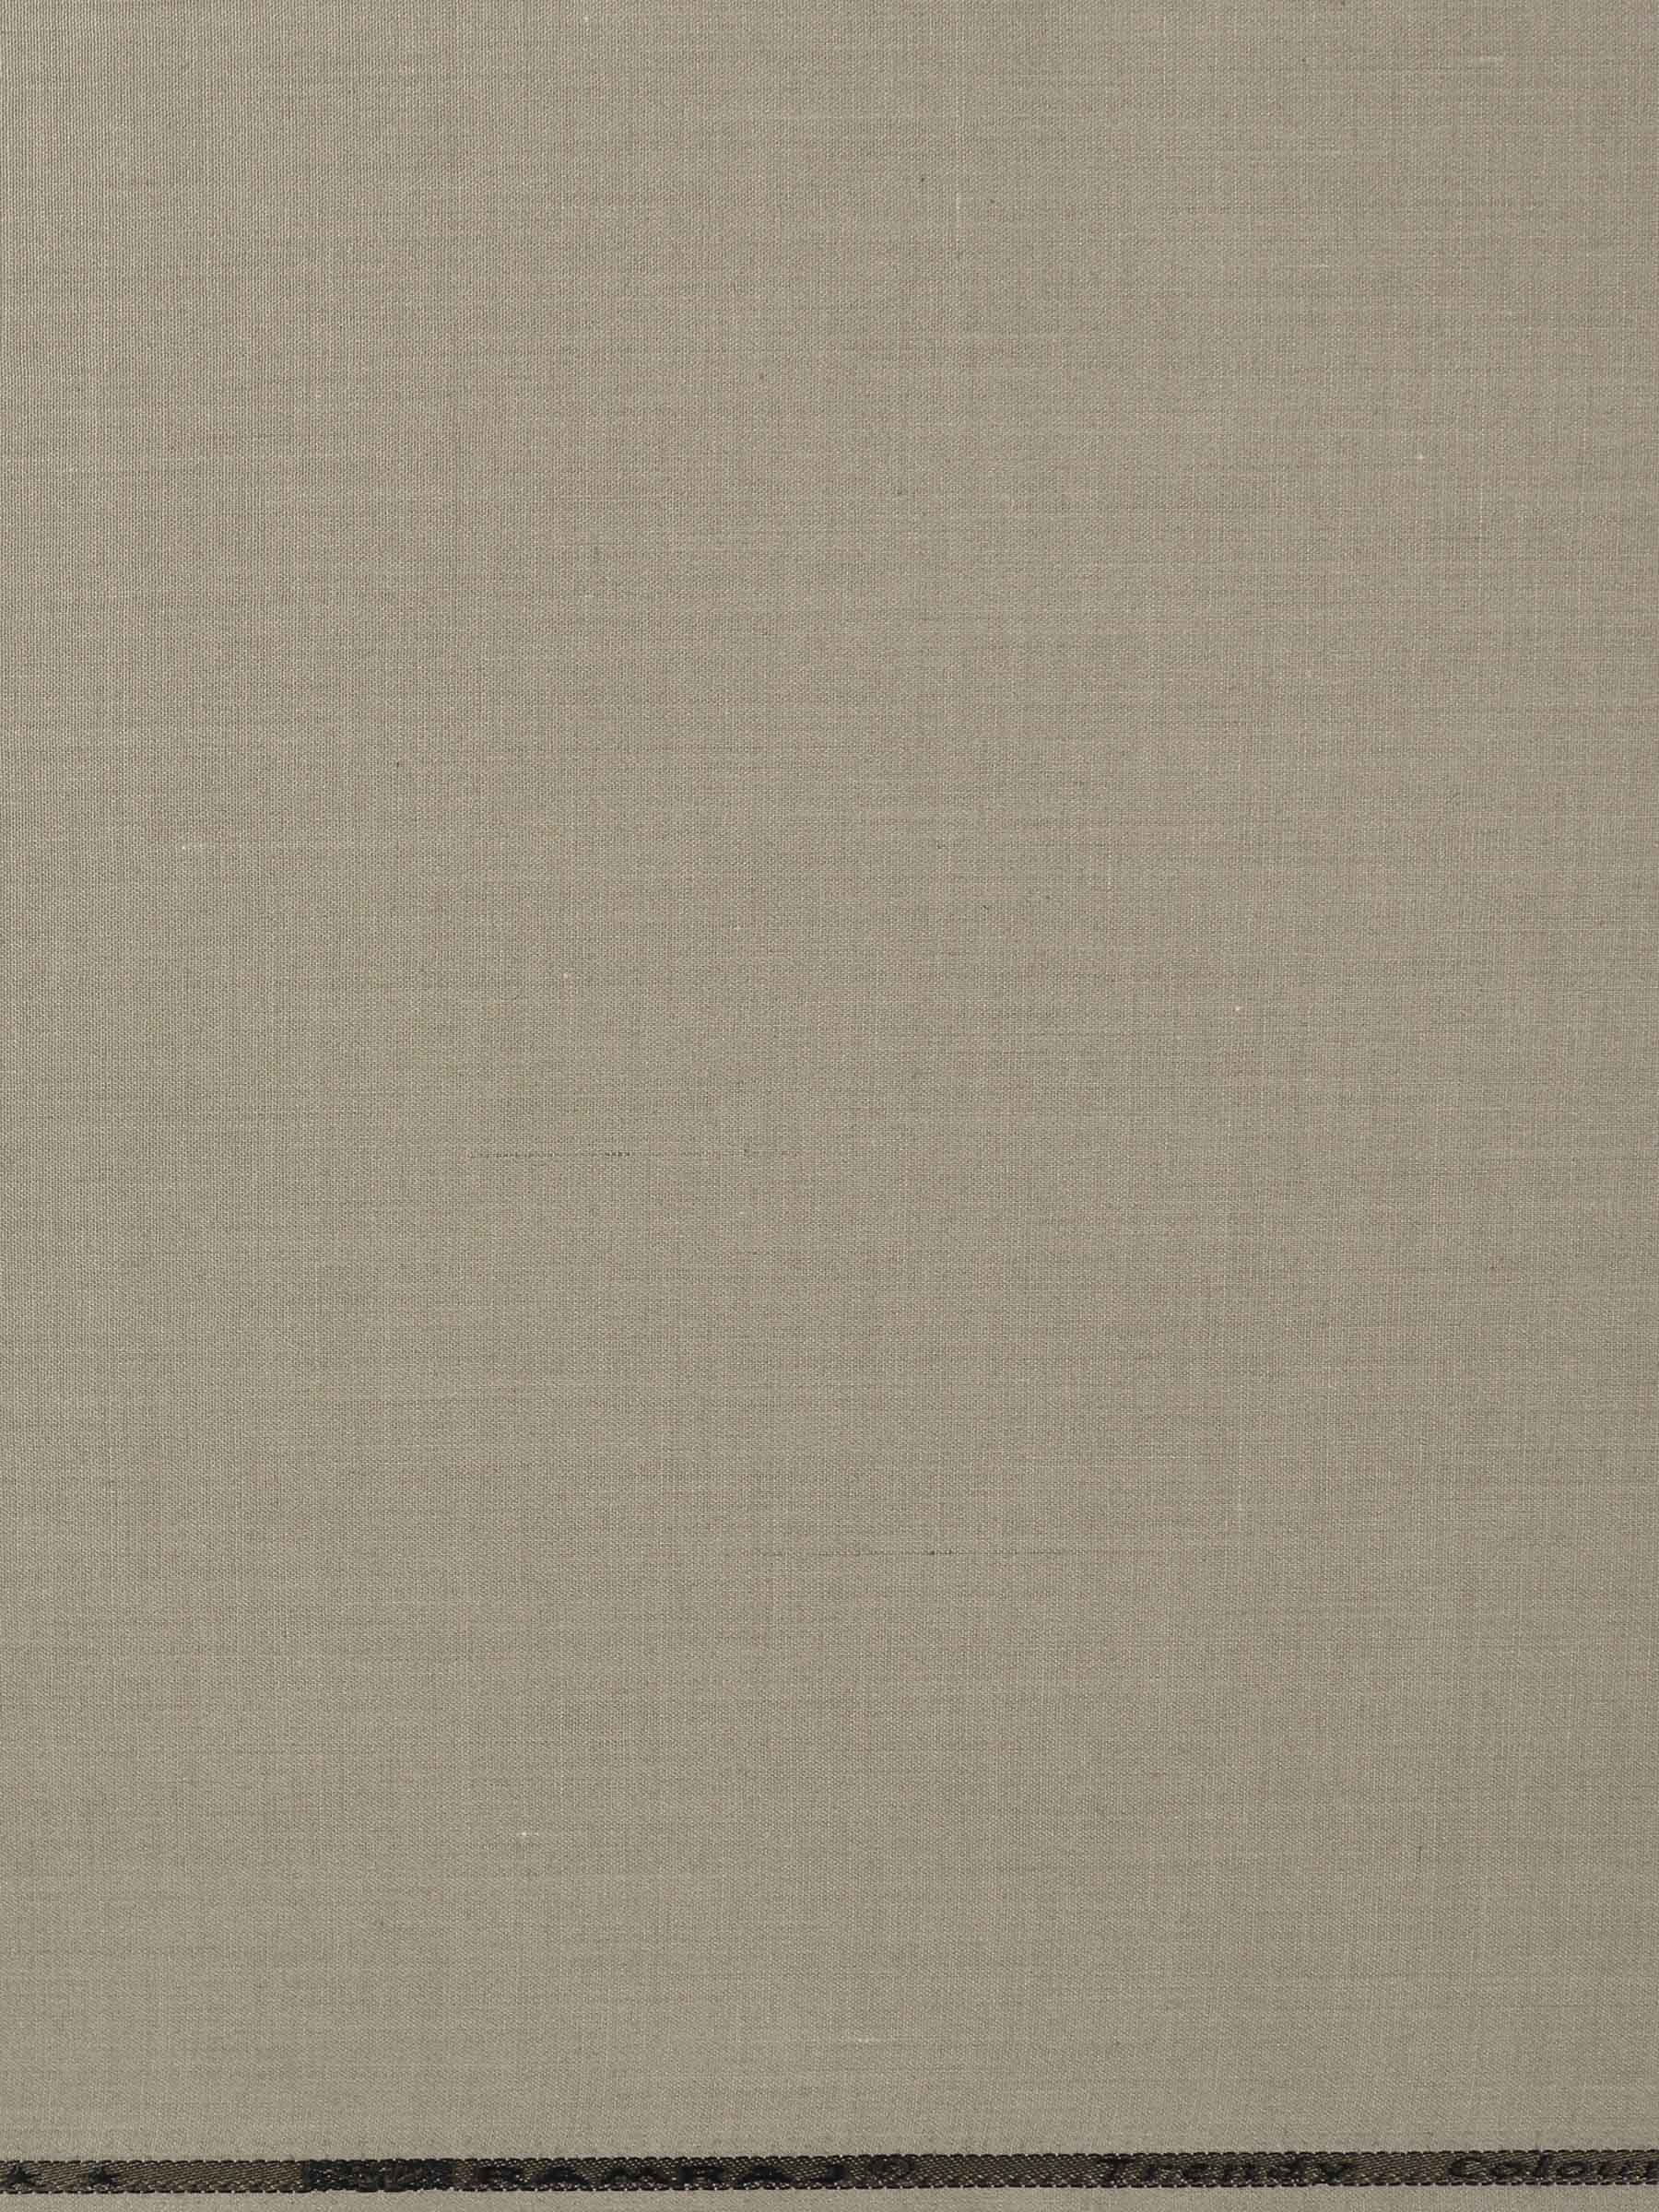 Cotton Blended Grey Plain Shirt Fabric Elight Gold-Zoom view